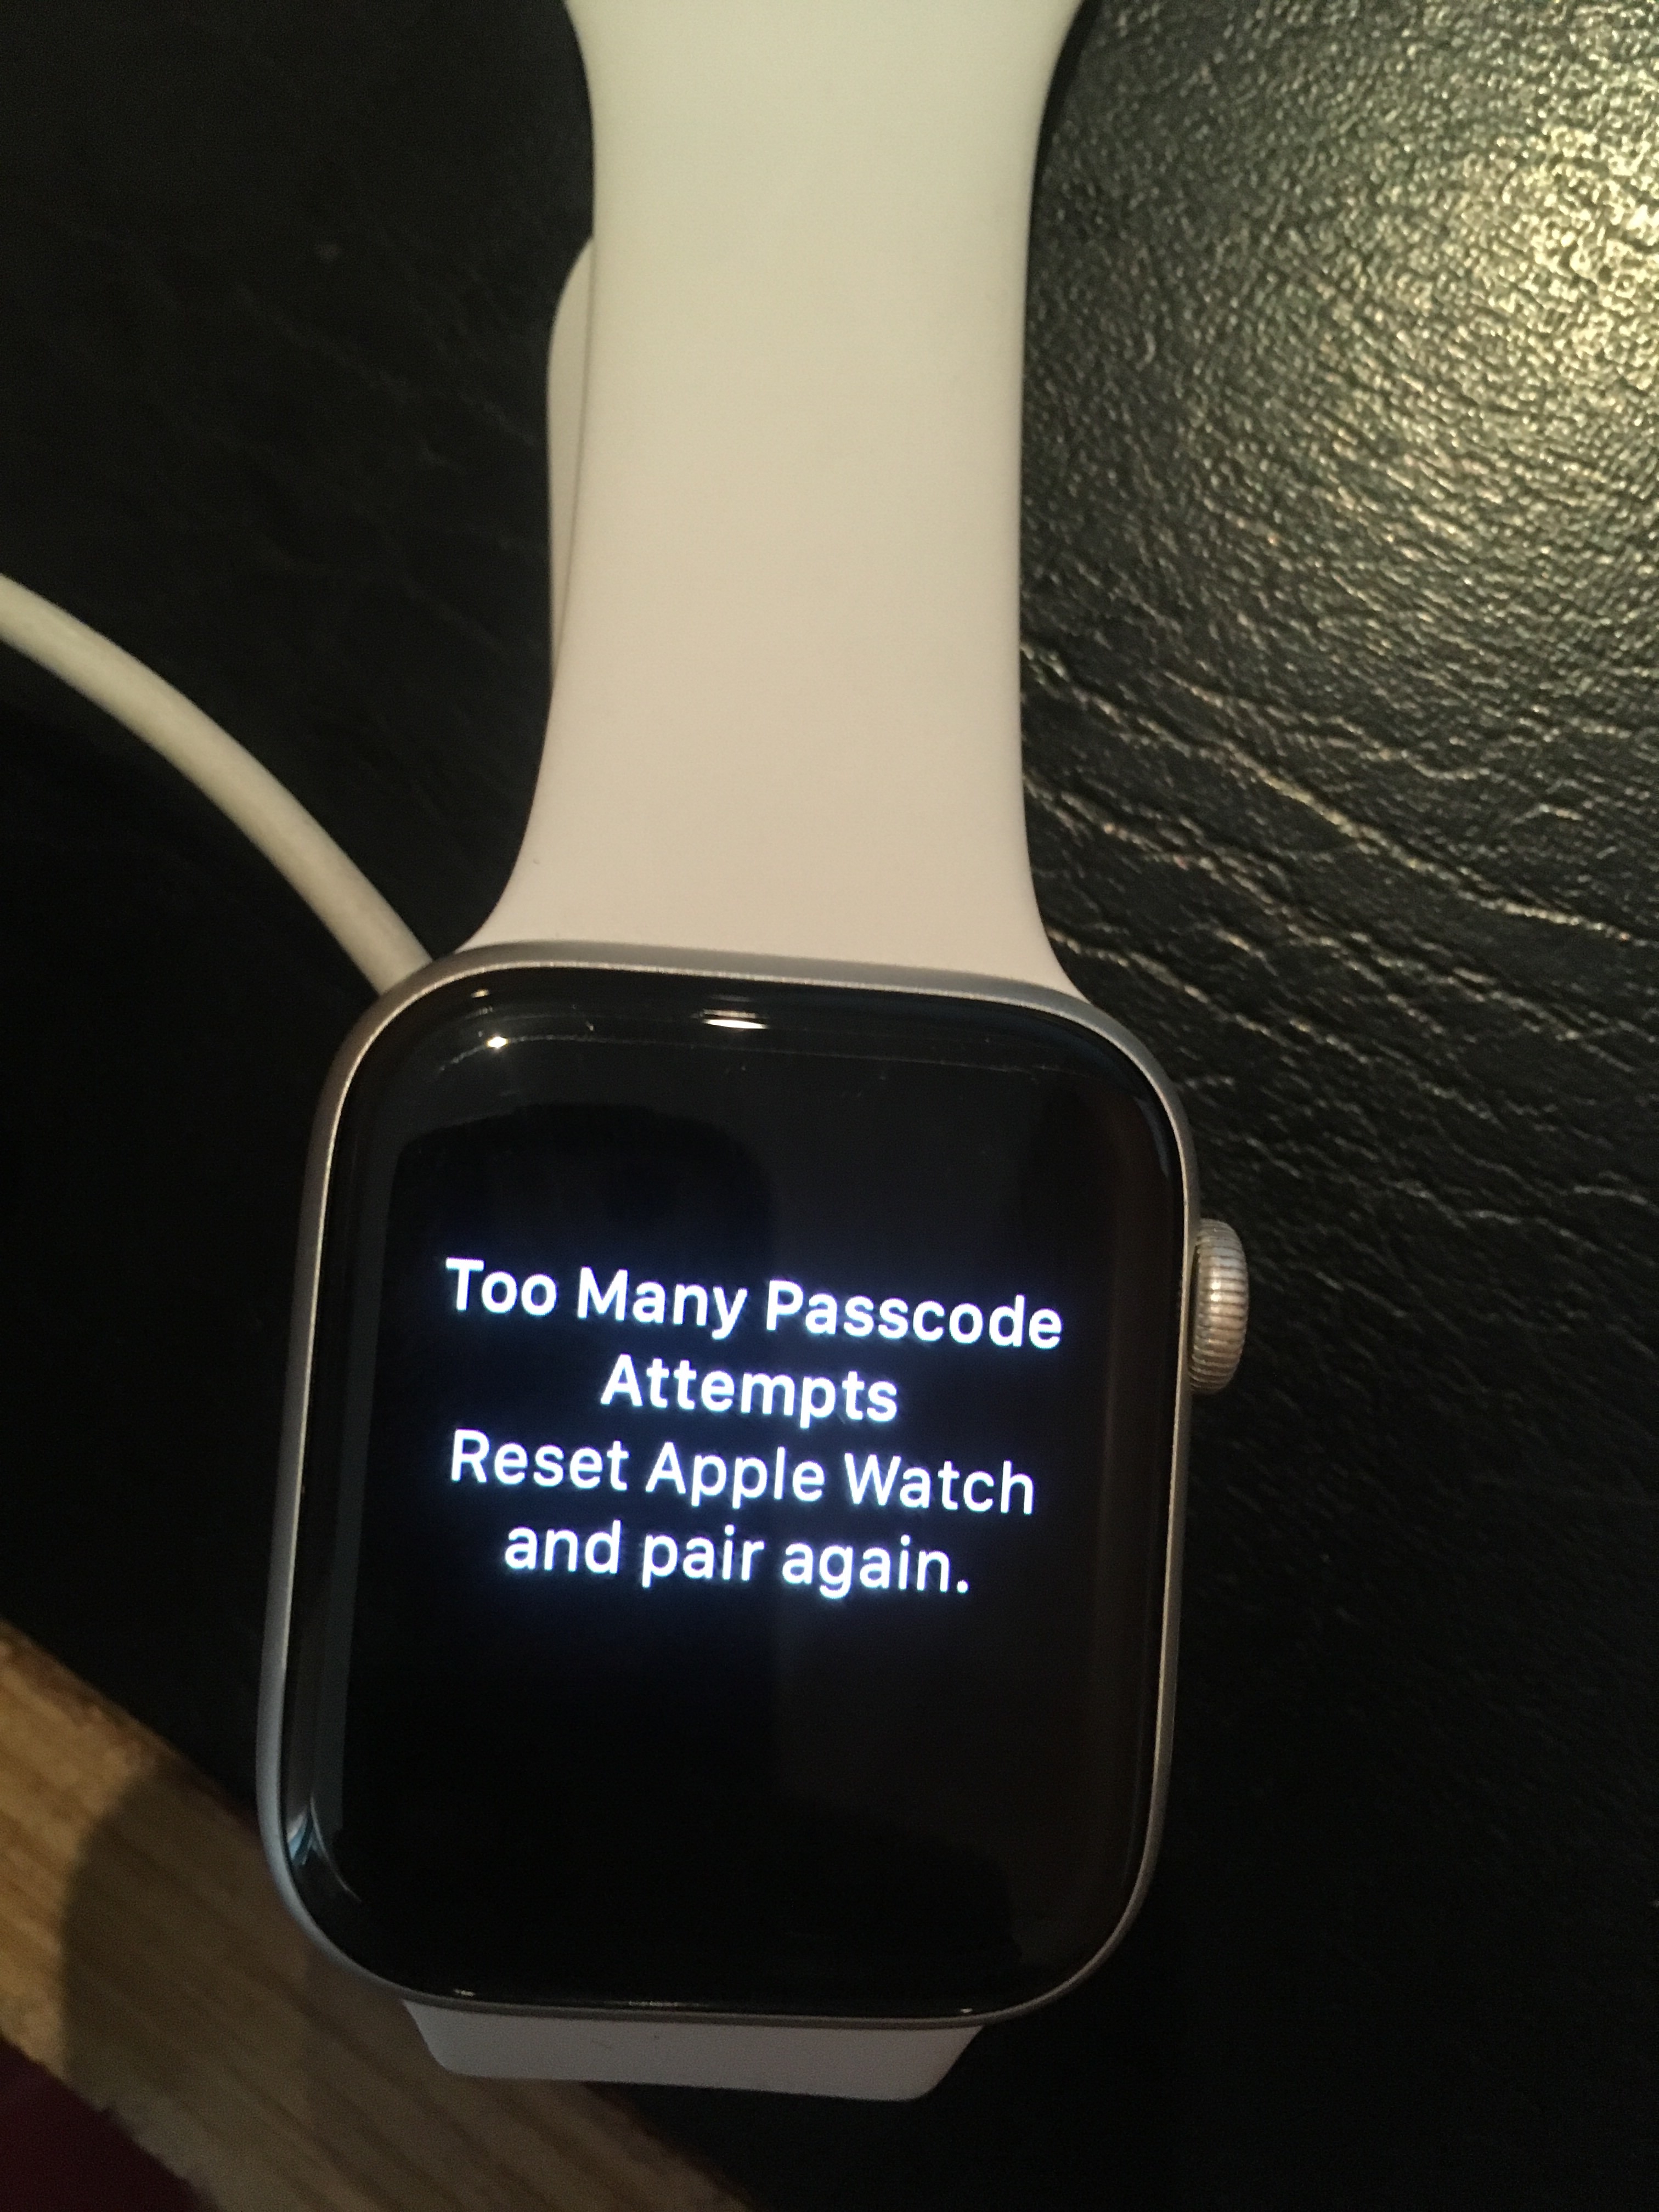 Apple Watch series 17 not accepting passwo - Apple Community